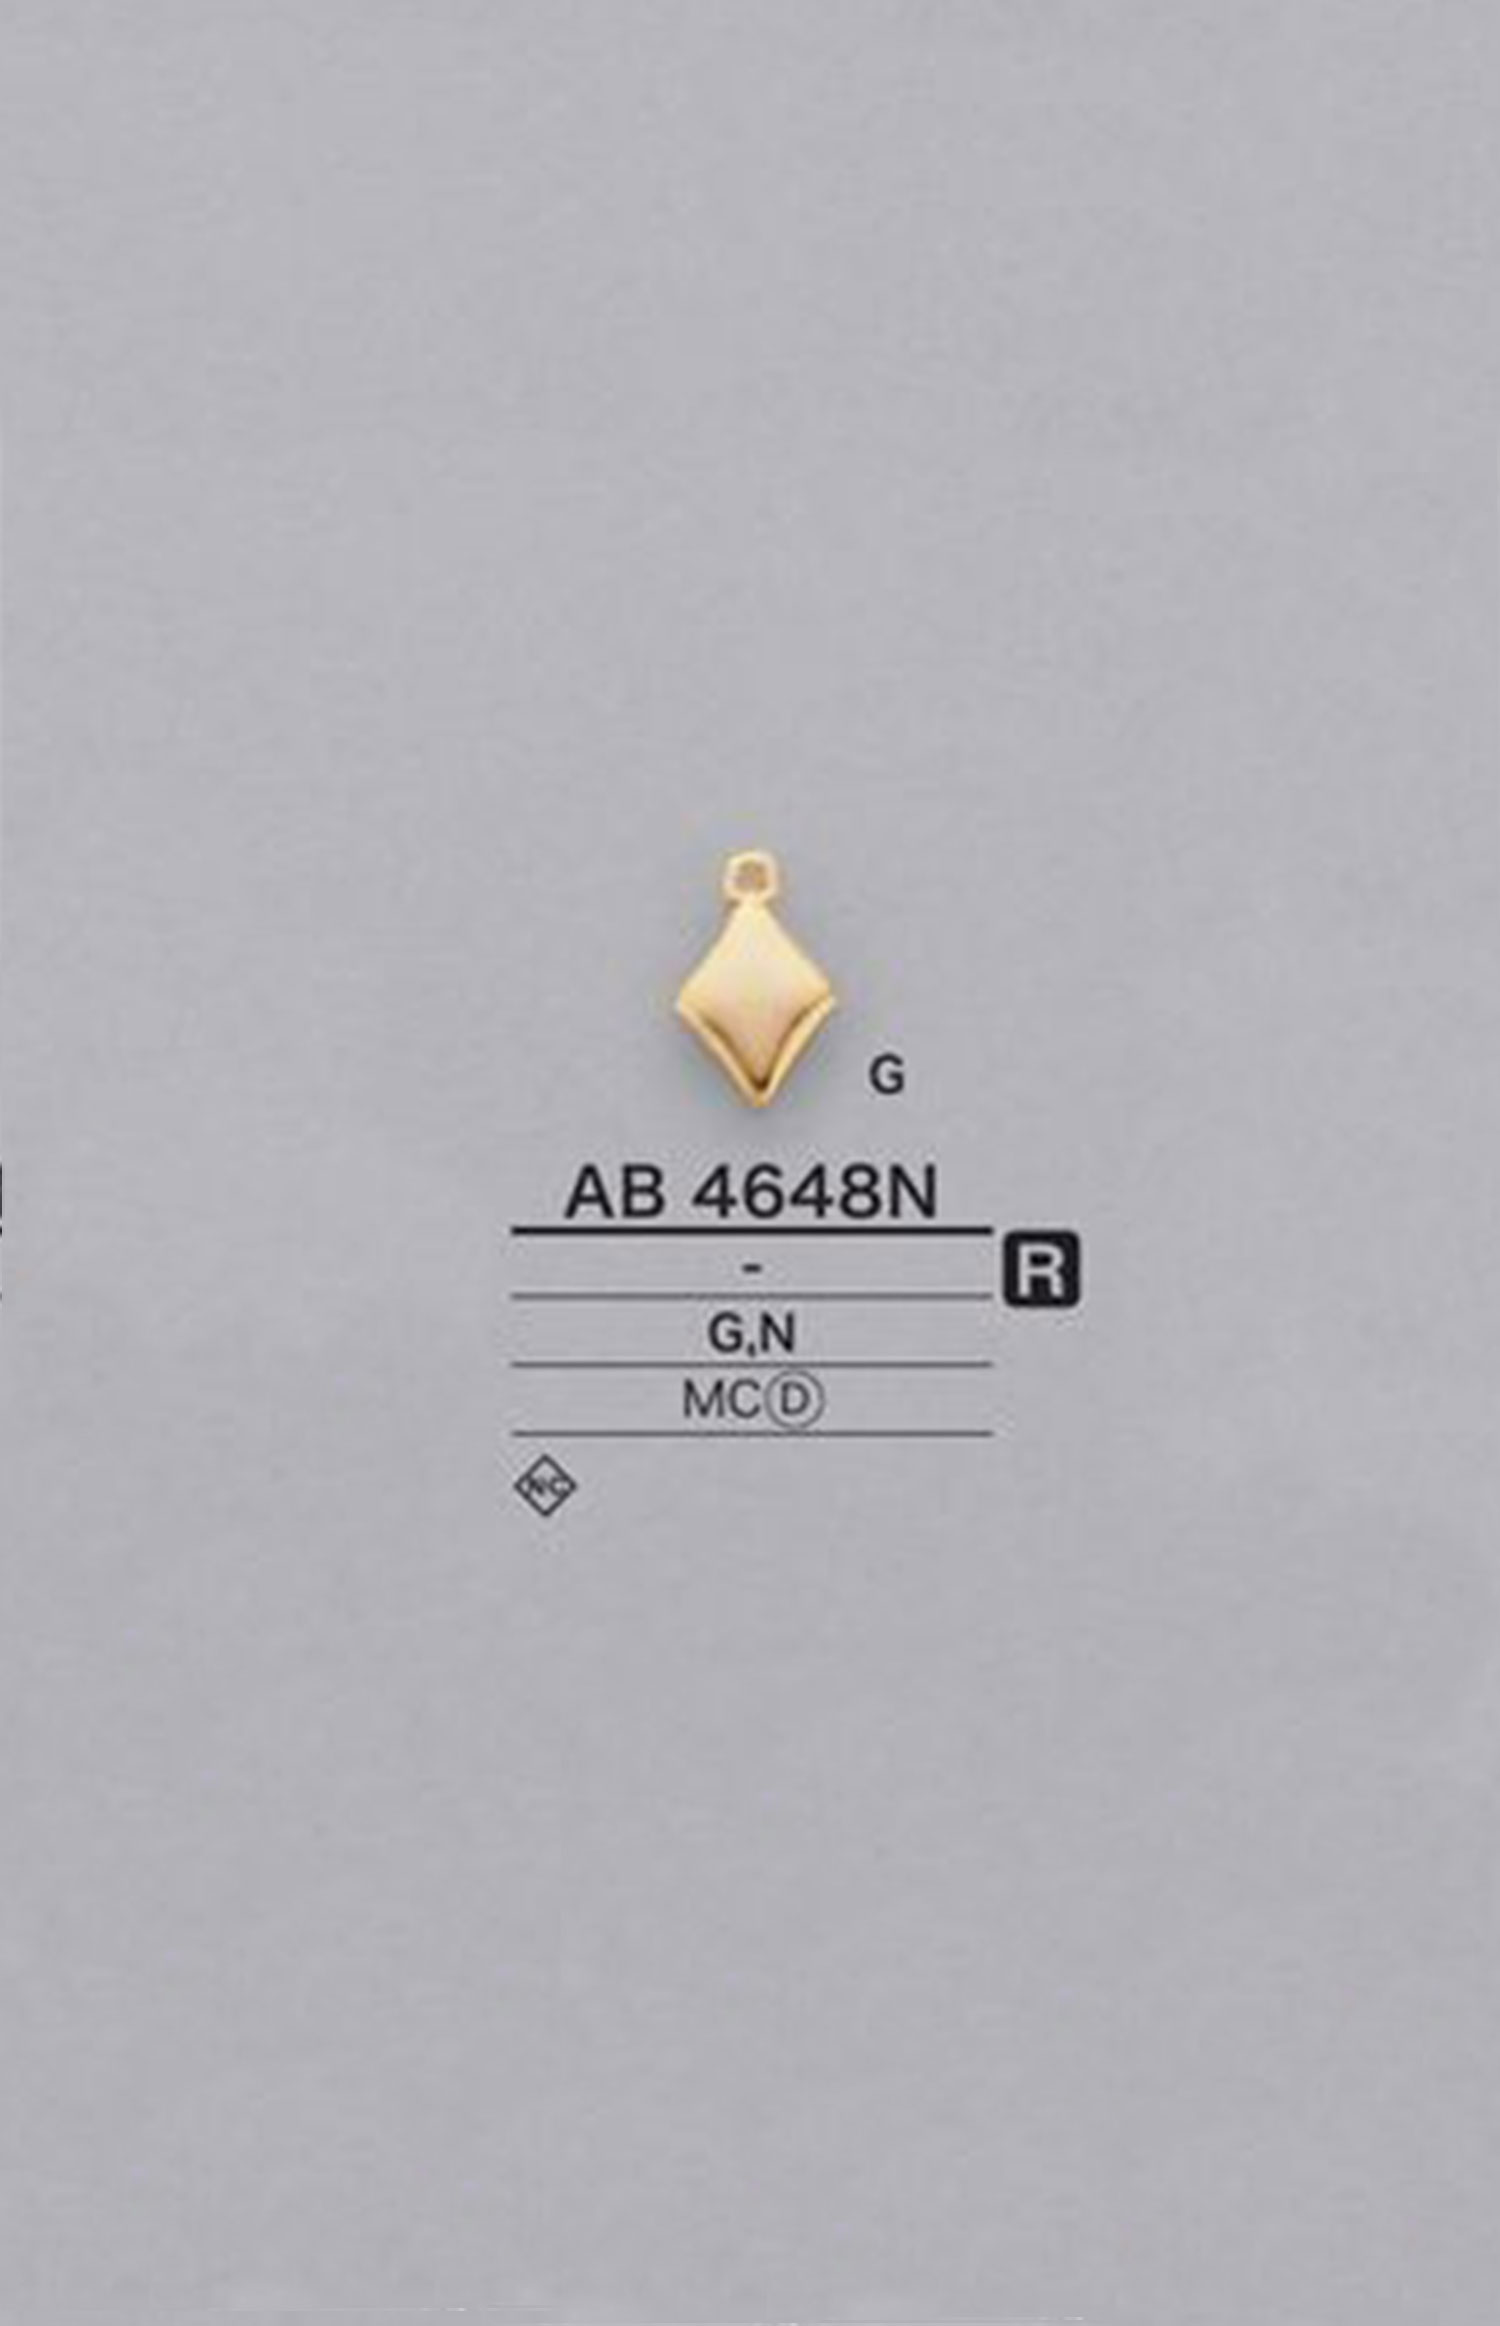 AB4648N Diamond-shaped Motif Parts[Miscellaneous Goods And Others] IRIS